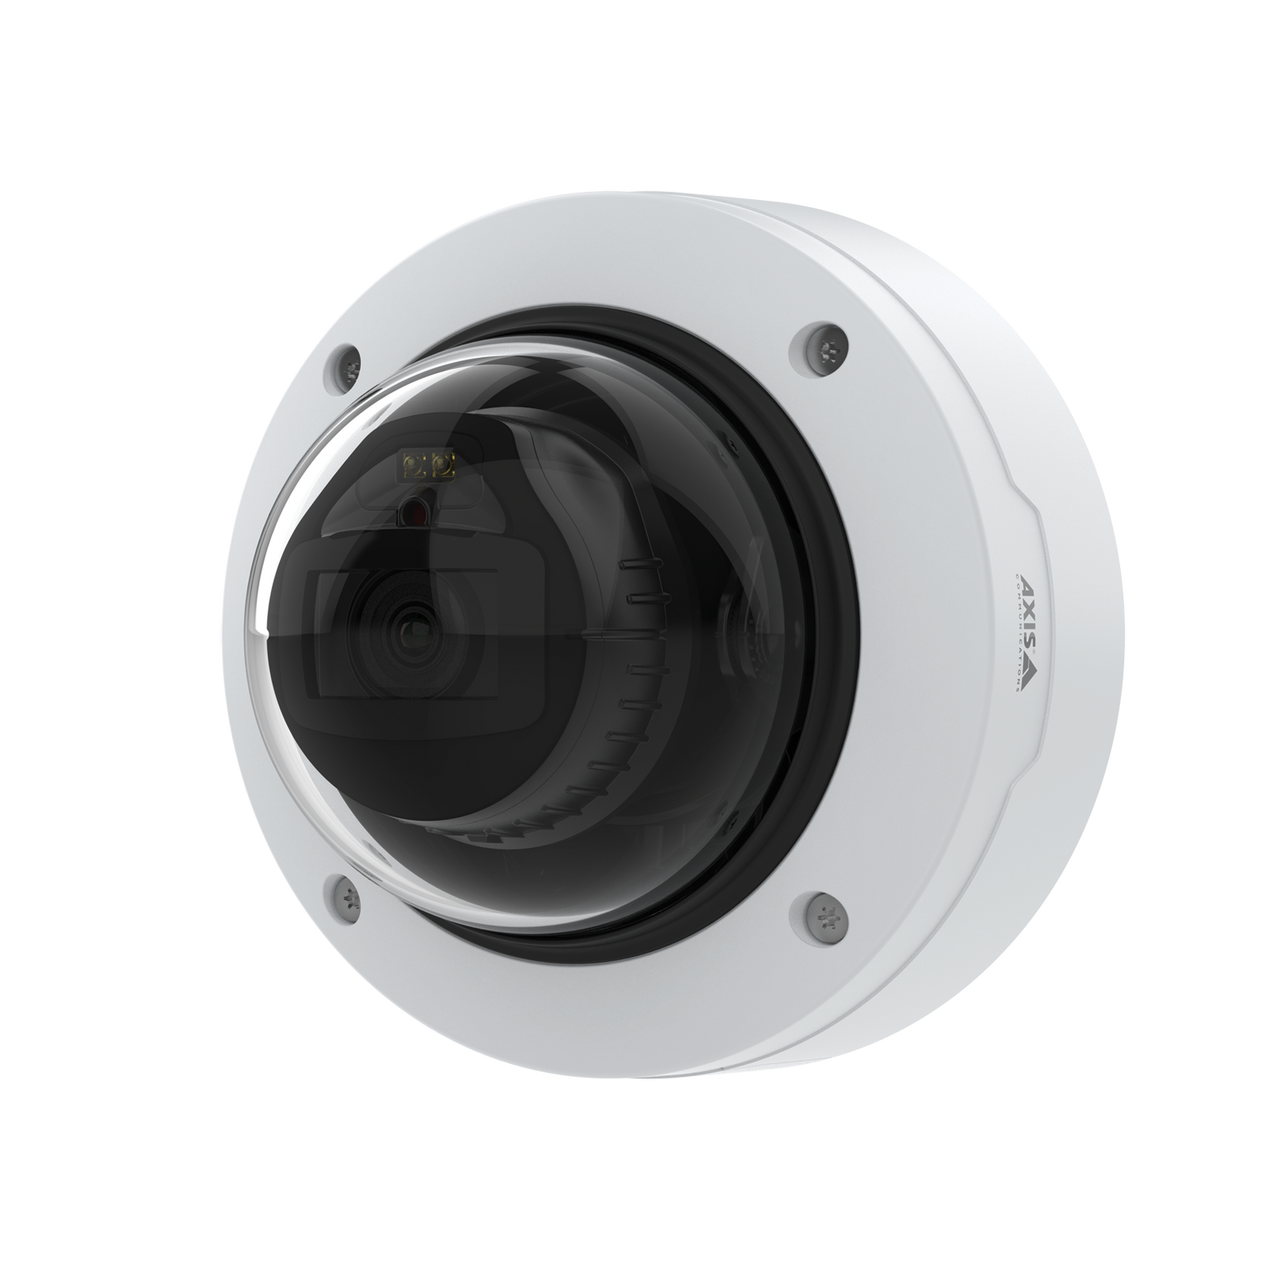 AXIS P3267-LV Indoor 5 MP dome with IR and deep learning